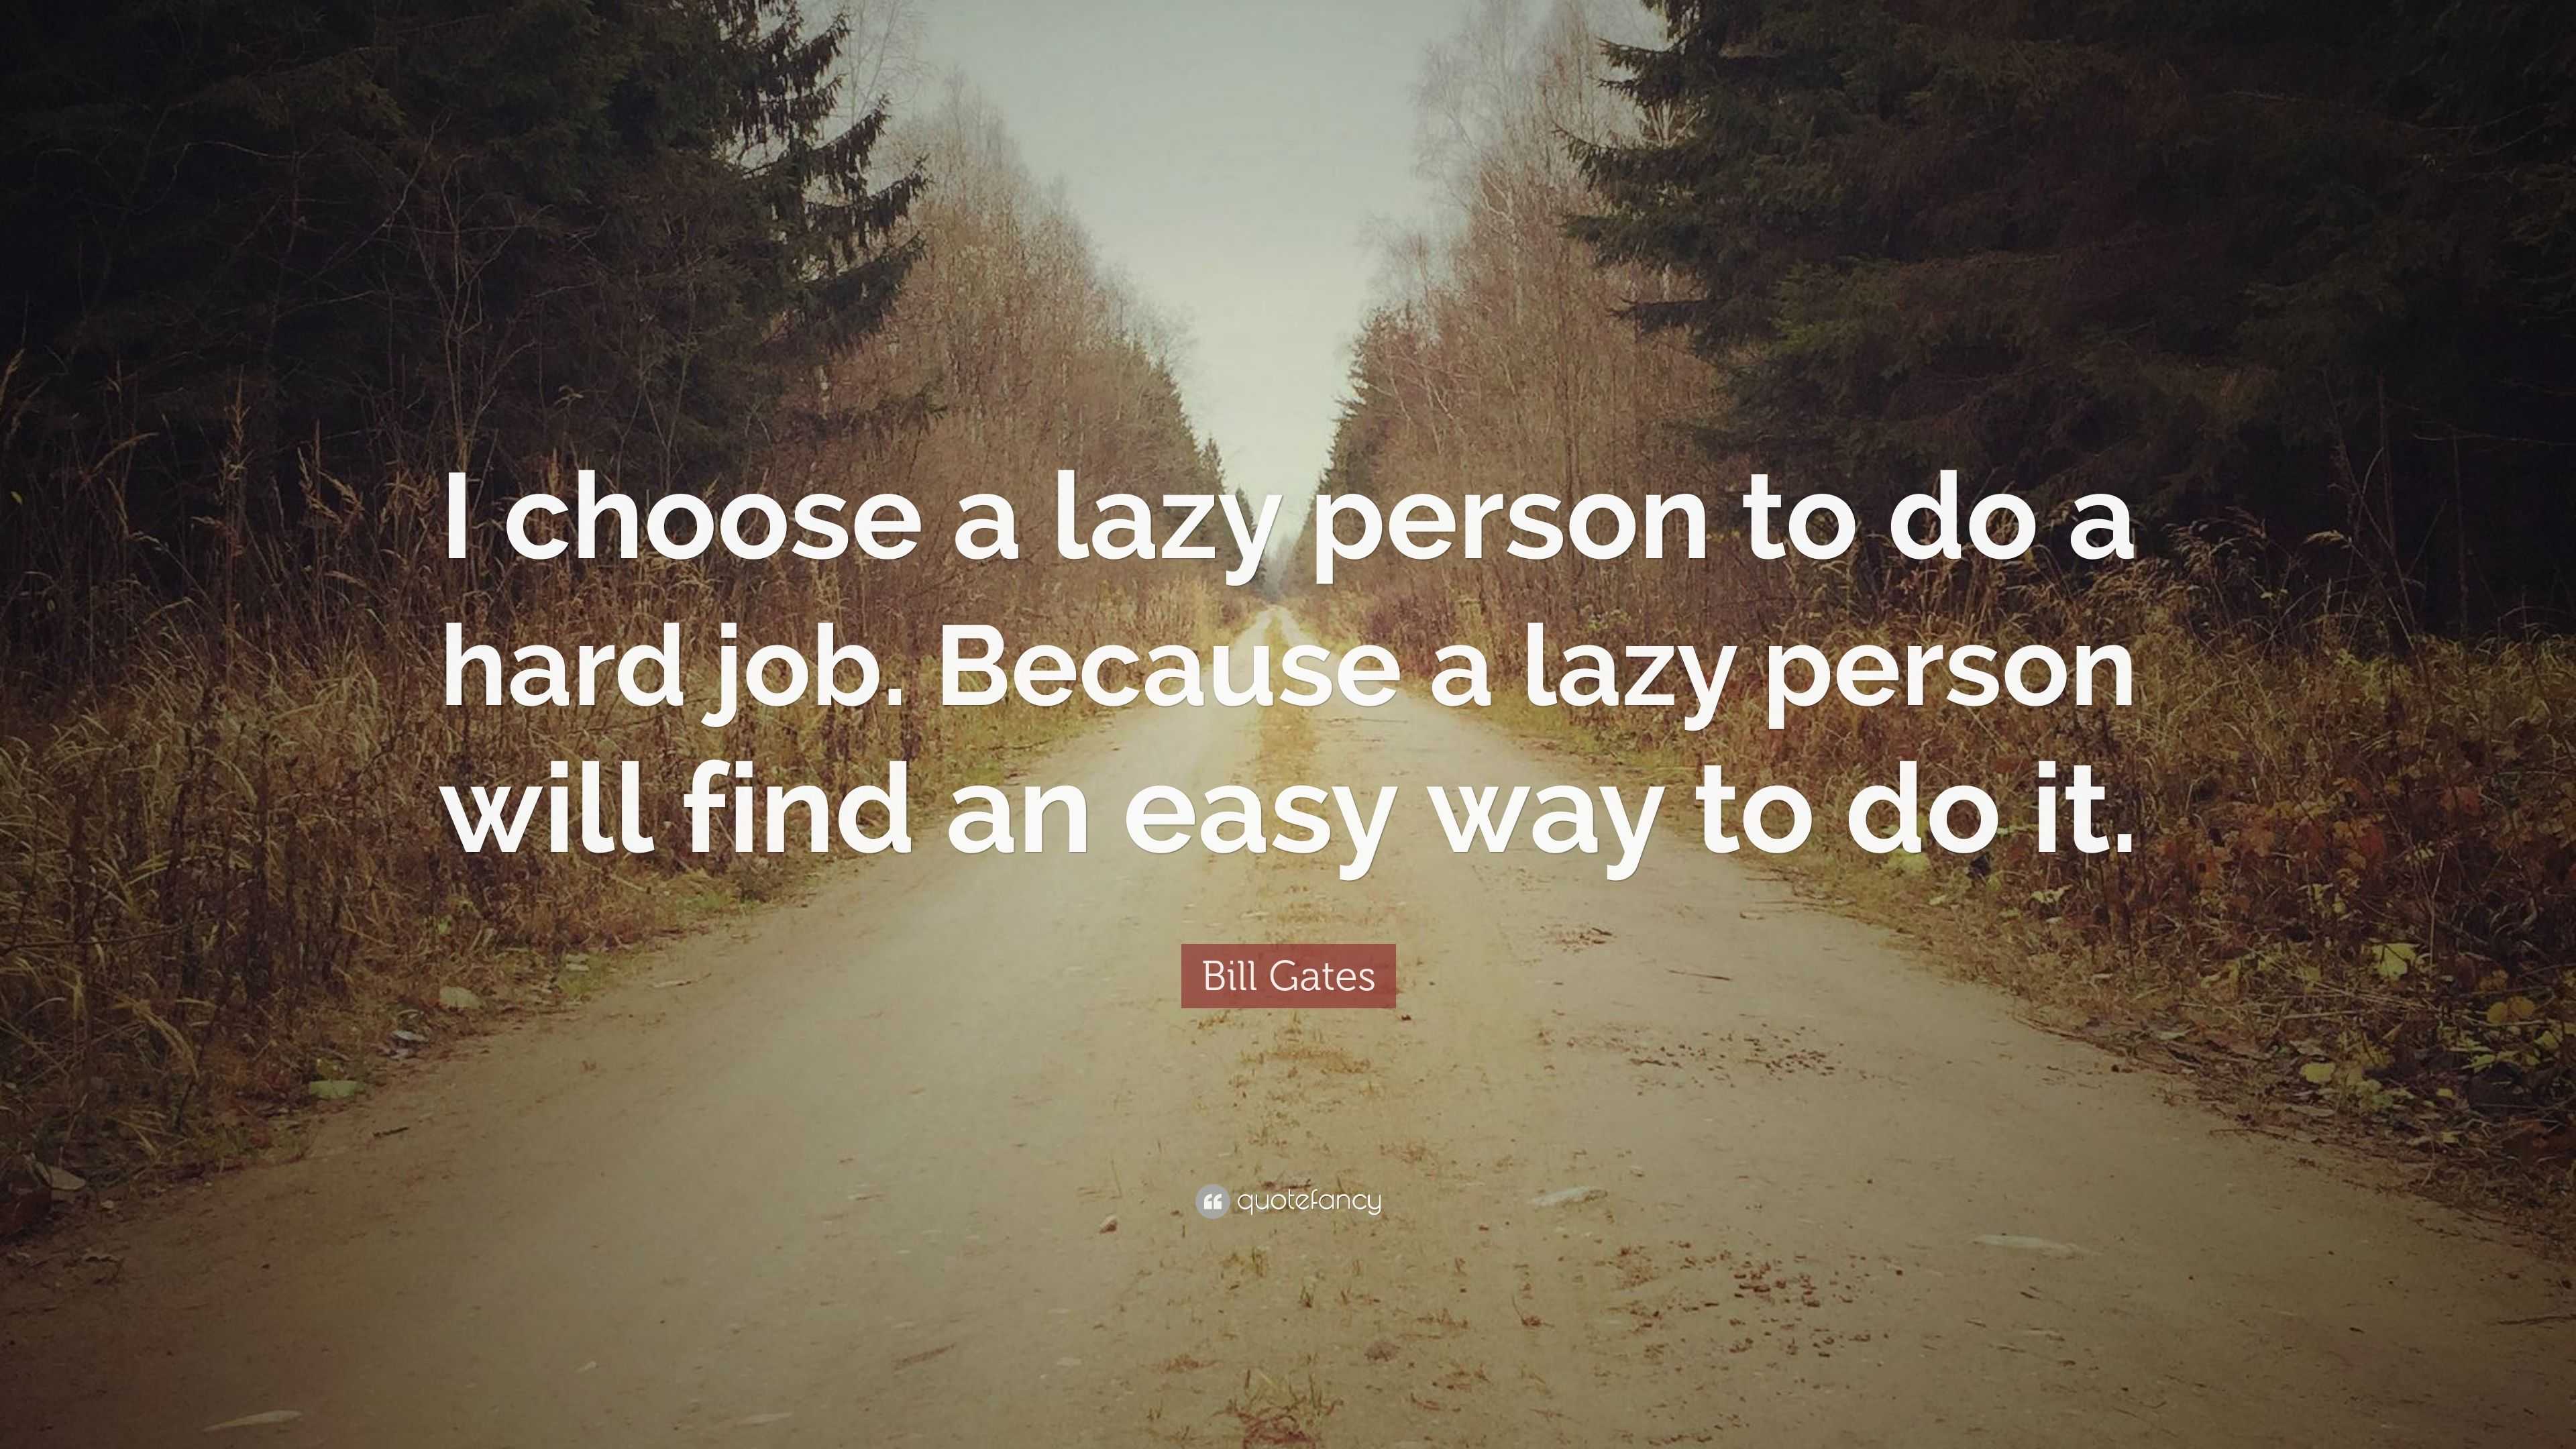 Bill Gates Quote: “I choose a lazy person to do a hard job. Because a